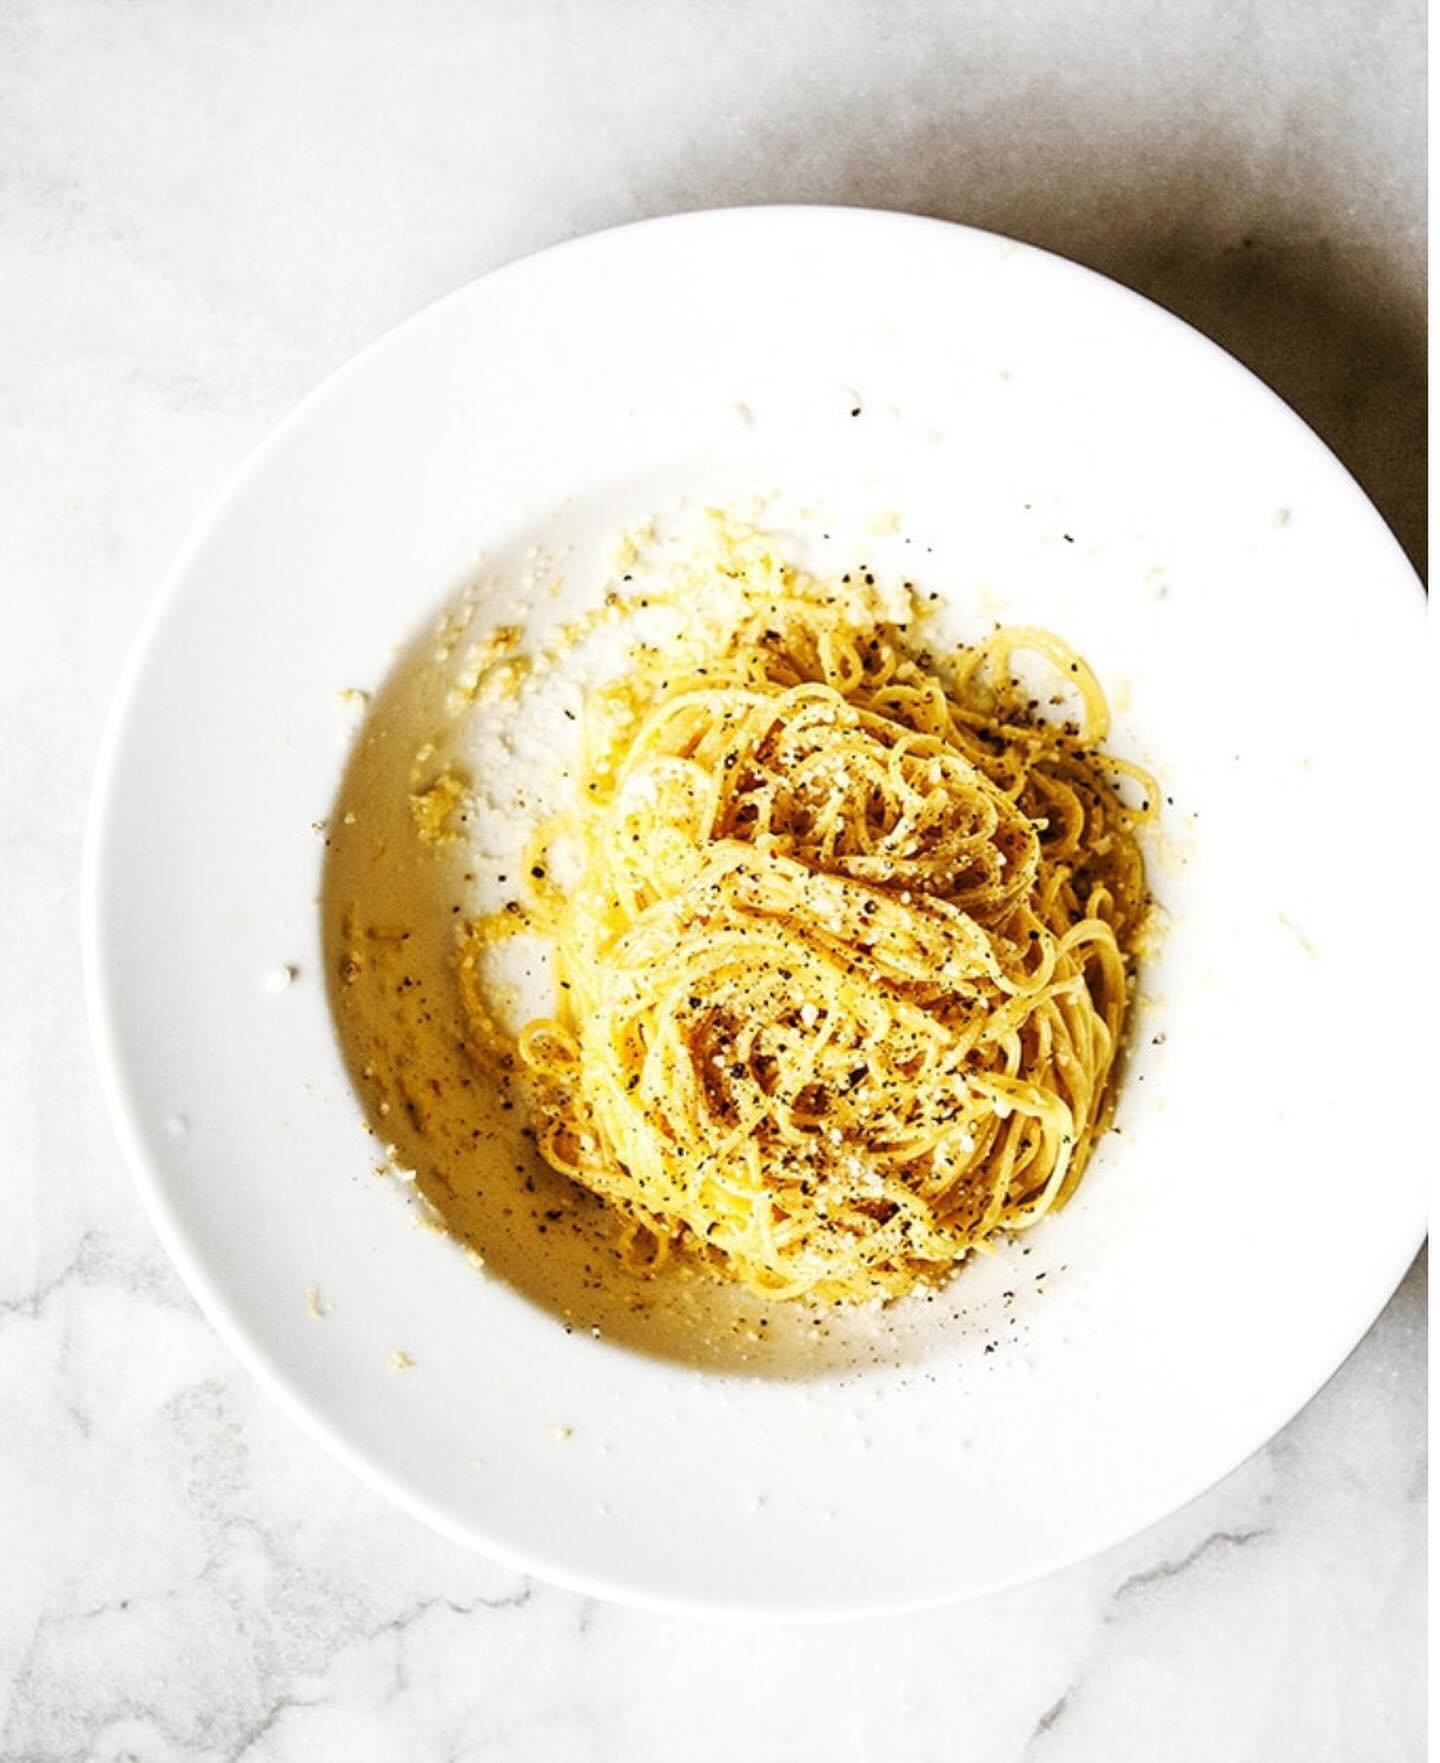 BEAUTIFUL FOOD BY DESIGN | NEW Pasta al Limone A simple weeknight Italian pasta for just a couple of people-Pasta al Limone, another Little Jewel from the Kitchen. 

TAP BIO FOR RECIPE 
https://bijouxs.com/pasta-al-limone/
.
.
.
.
#pasta #lemon #week